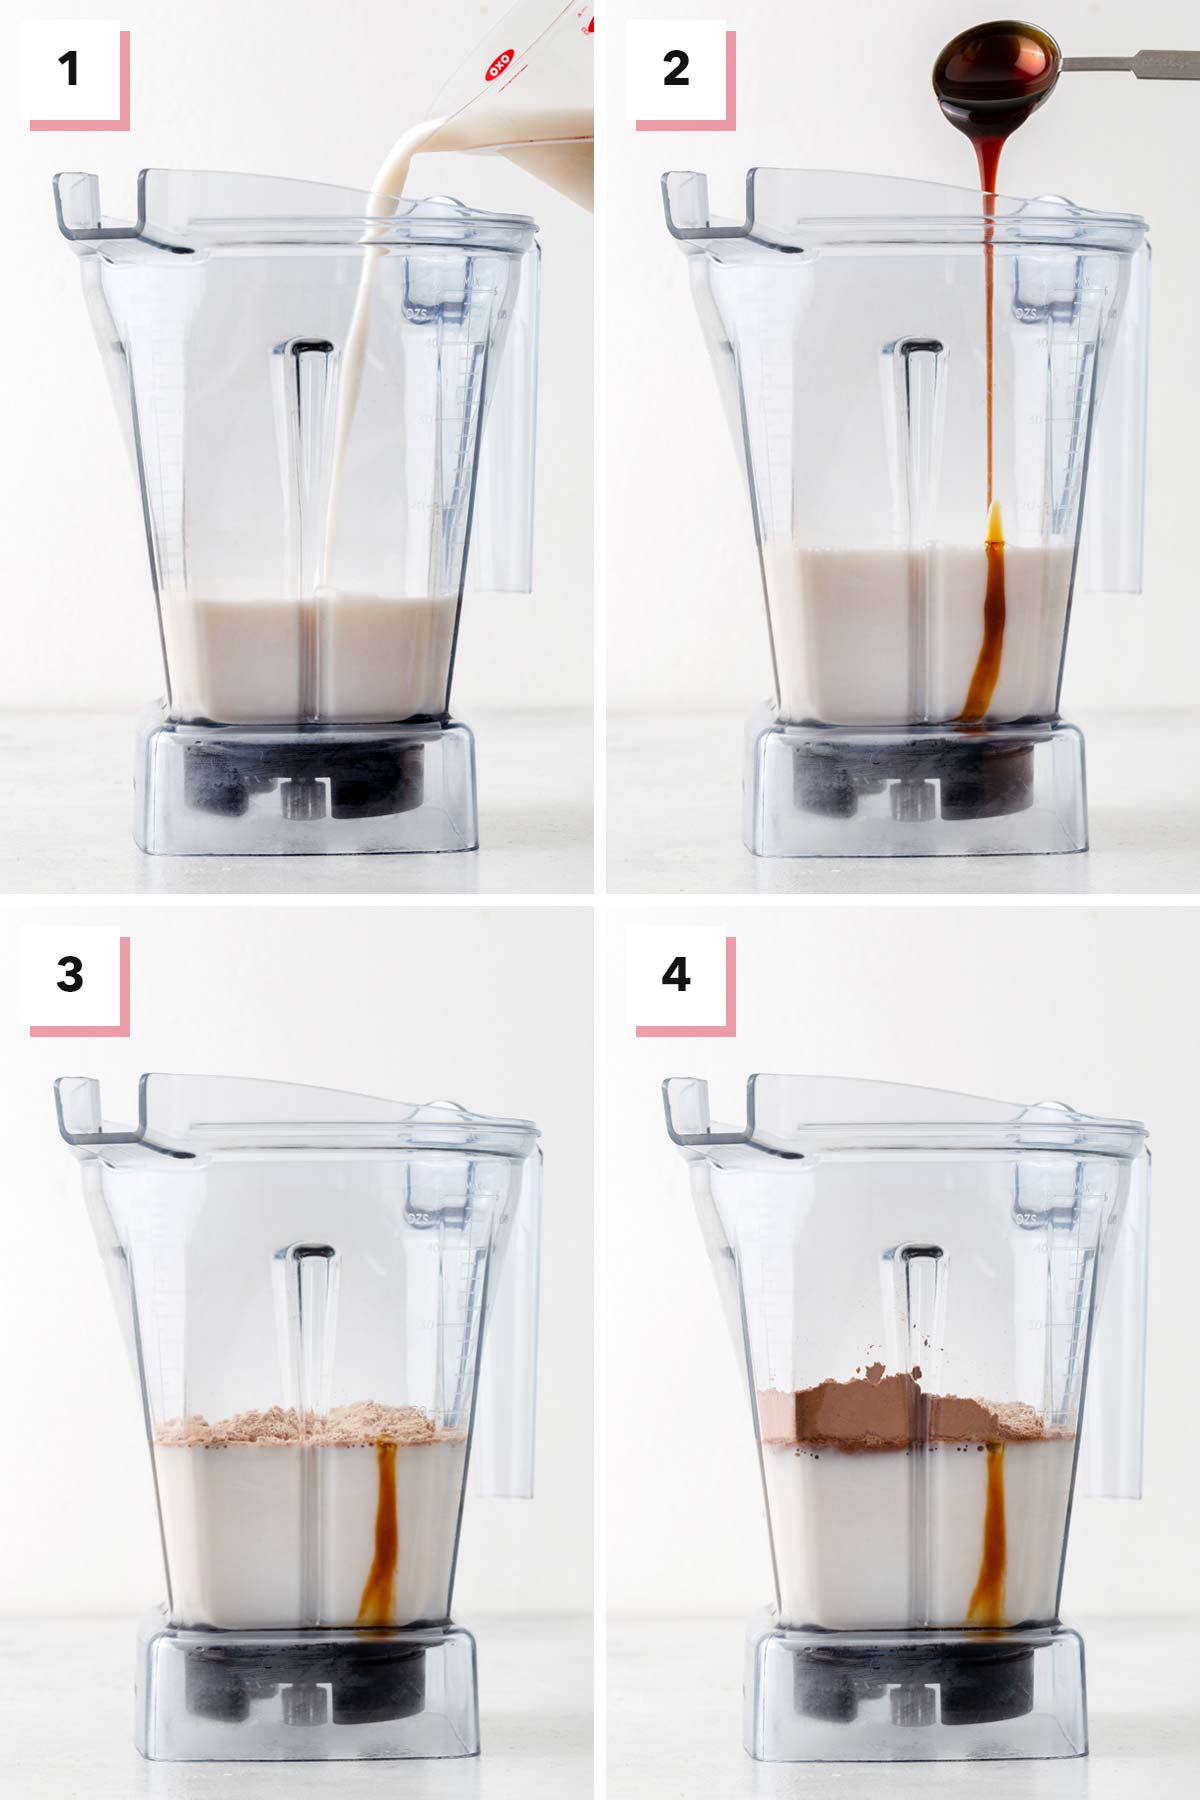 Steps for making a chocolate protein shake.